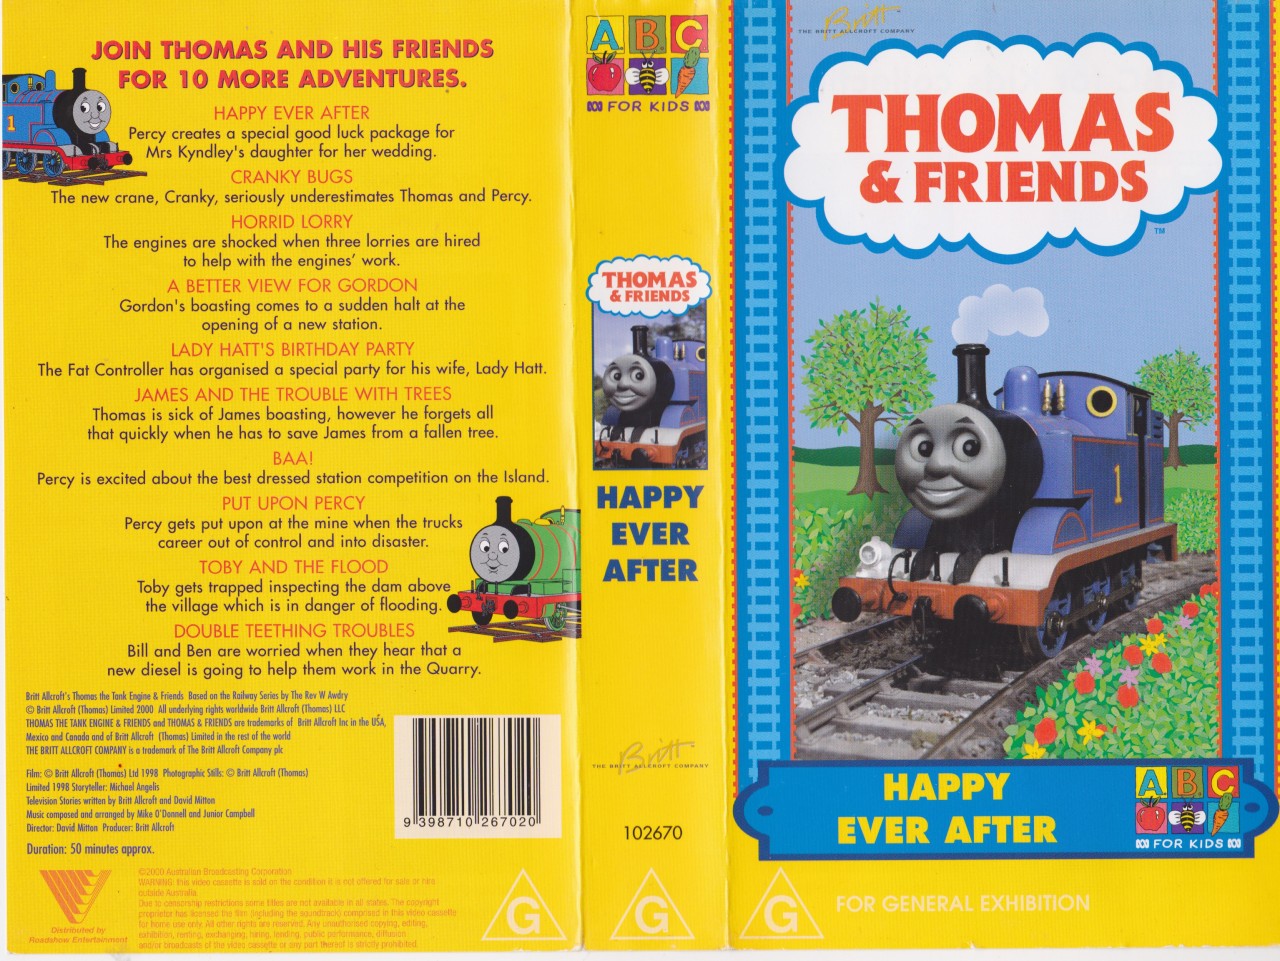 THOMAS THE TANK ENGINE HAPPY EVER AFTER VHS VIDEO PAL A RARE FIND | eBay